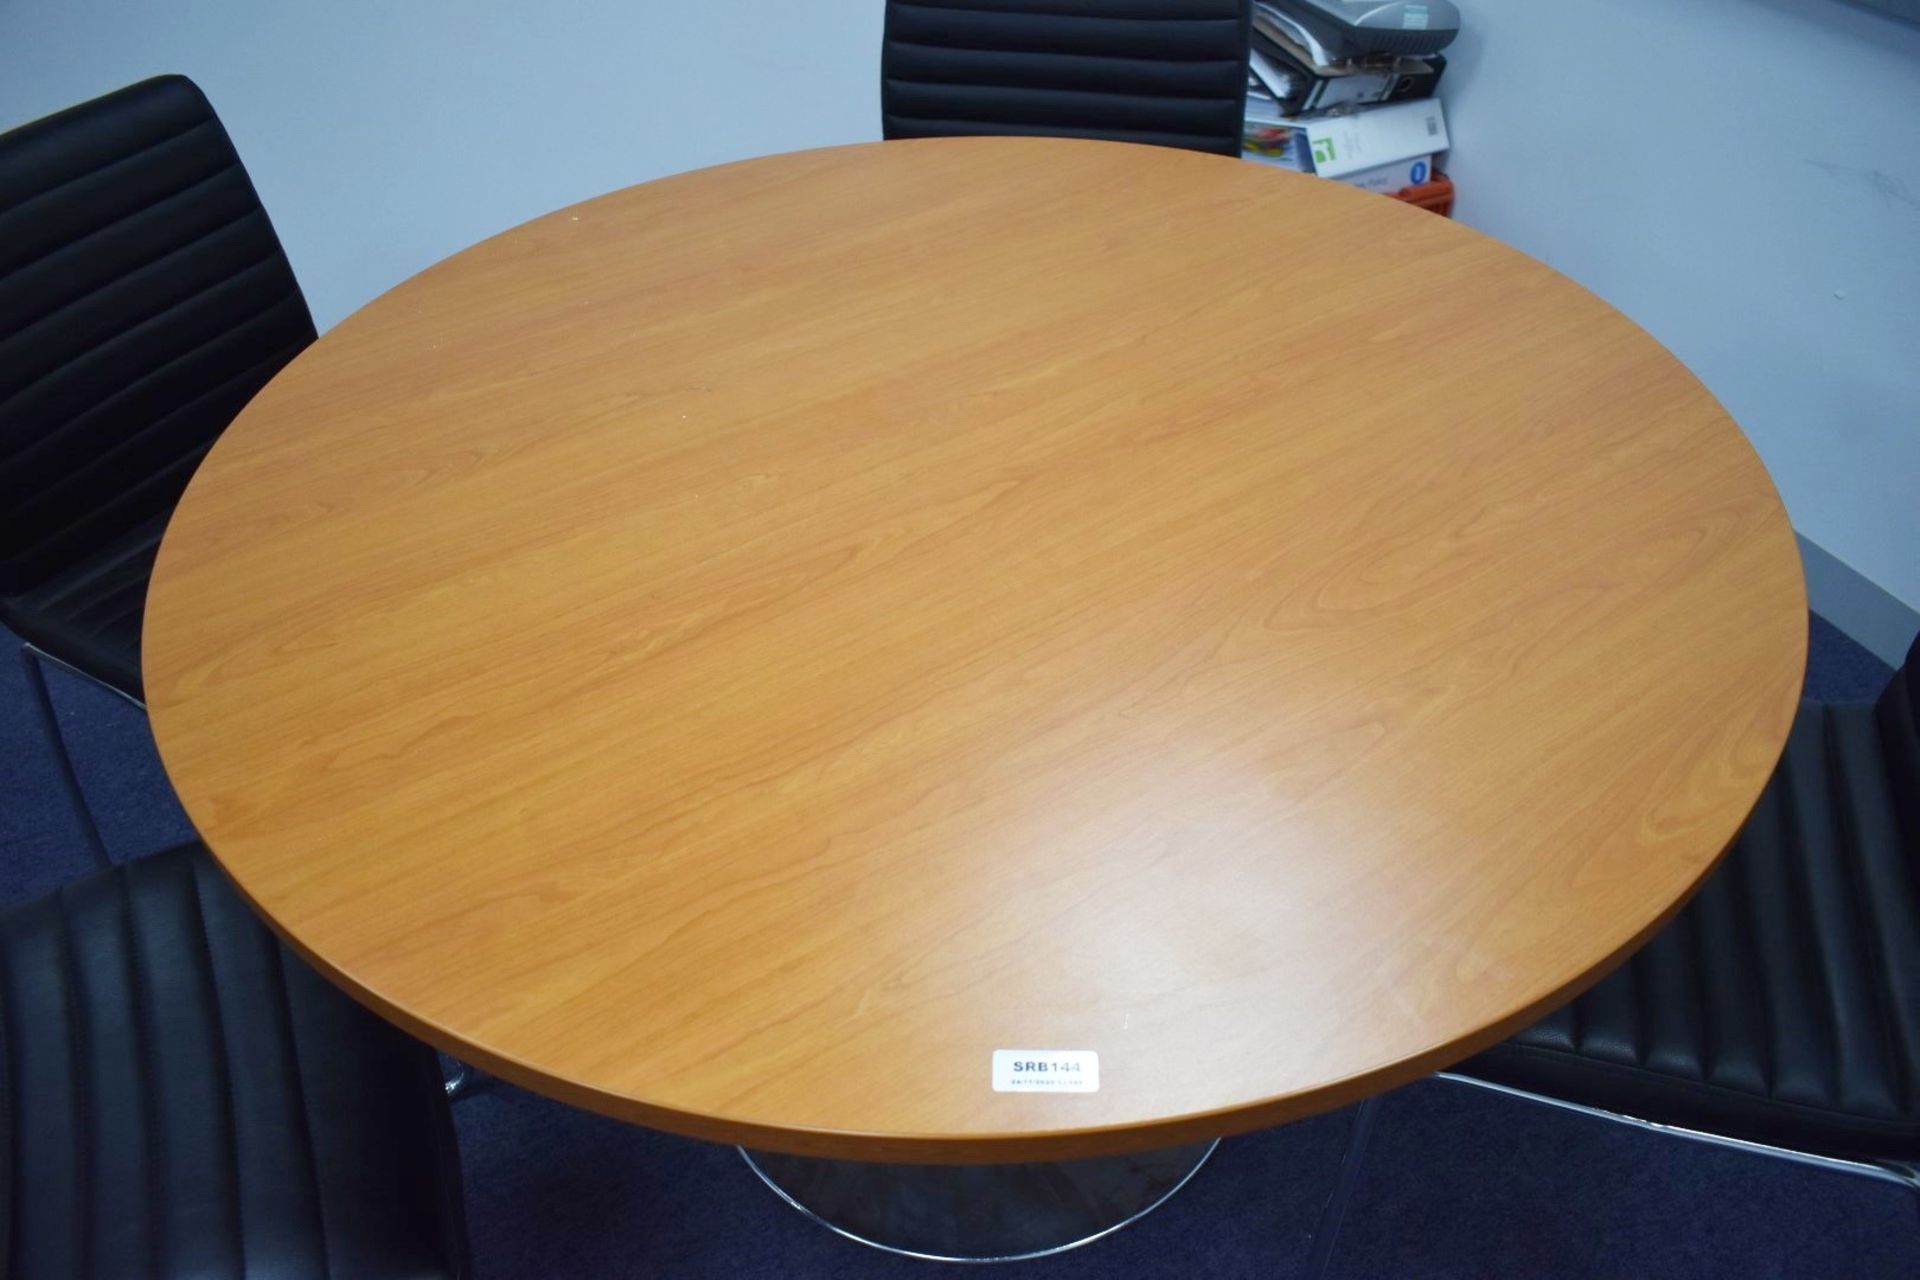 1 x Cherry Wood Office Meeting Table With Chrome Base and Four Black Faux Leather Office Chairs - Image 4 of 6